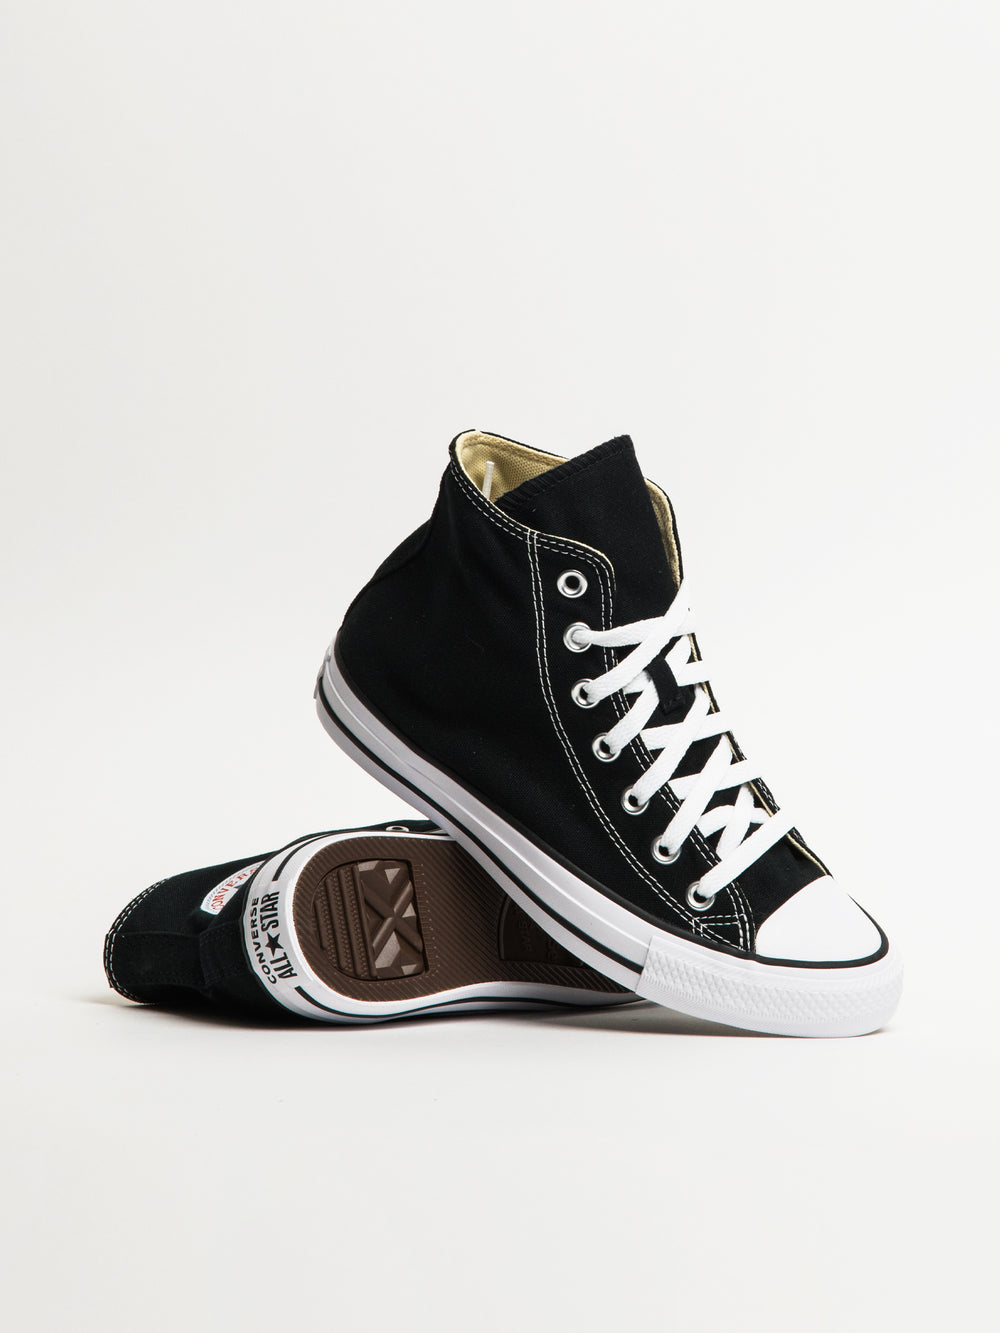 CONVERSE All Star Canvas Lace Up Sneakers | Sneakers, Womens shoes sneakers,  Converse all star